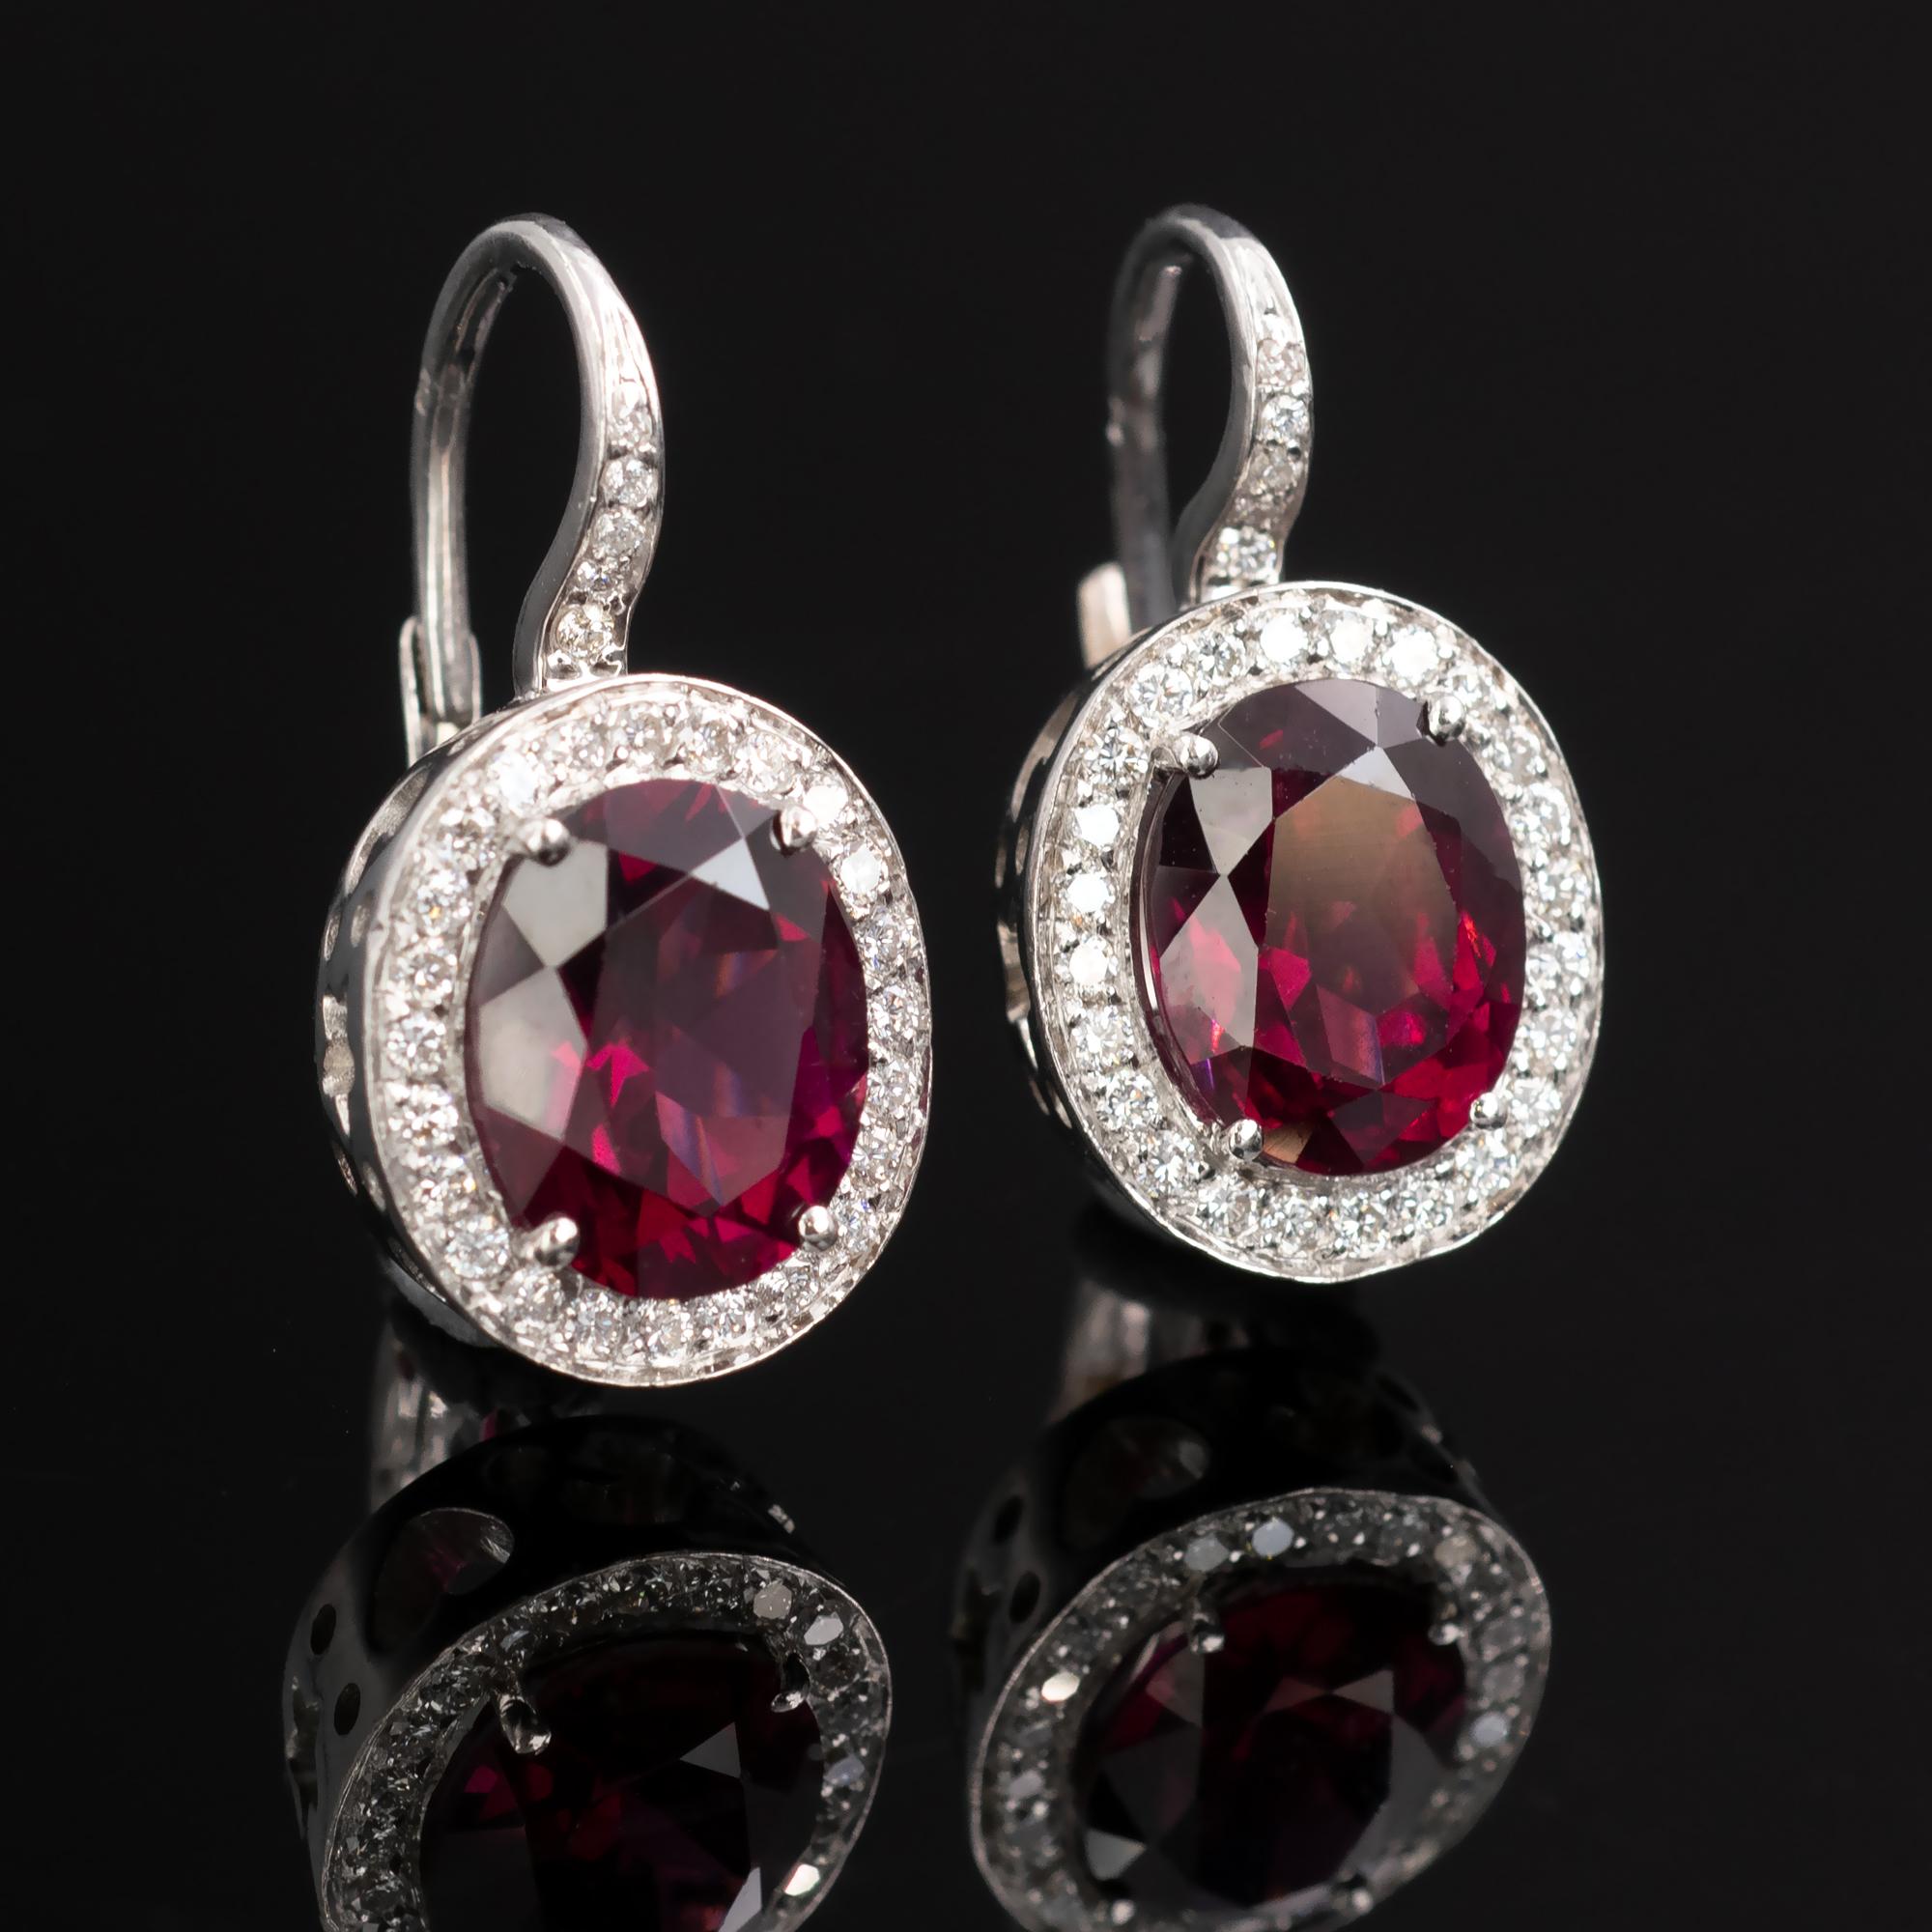 Lively oval rhodolite garnet with halo diamonds around on 18 Karat white gold.
The sides of the earrings are decorated with stars, hearts, and moon crescent cut-outs. 
The make is excellent, which gives these trendy earrings a very pleasant hefty